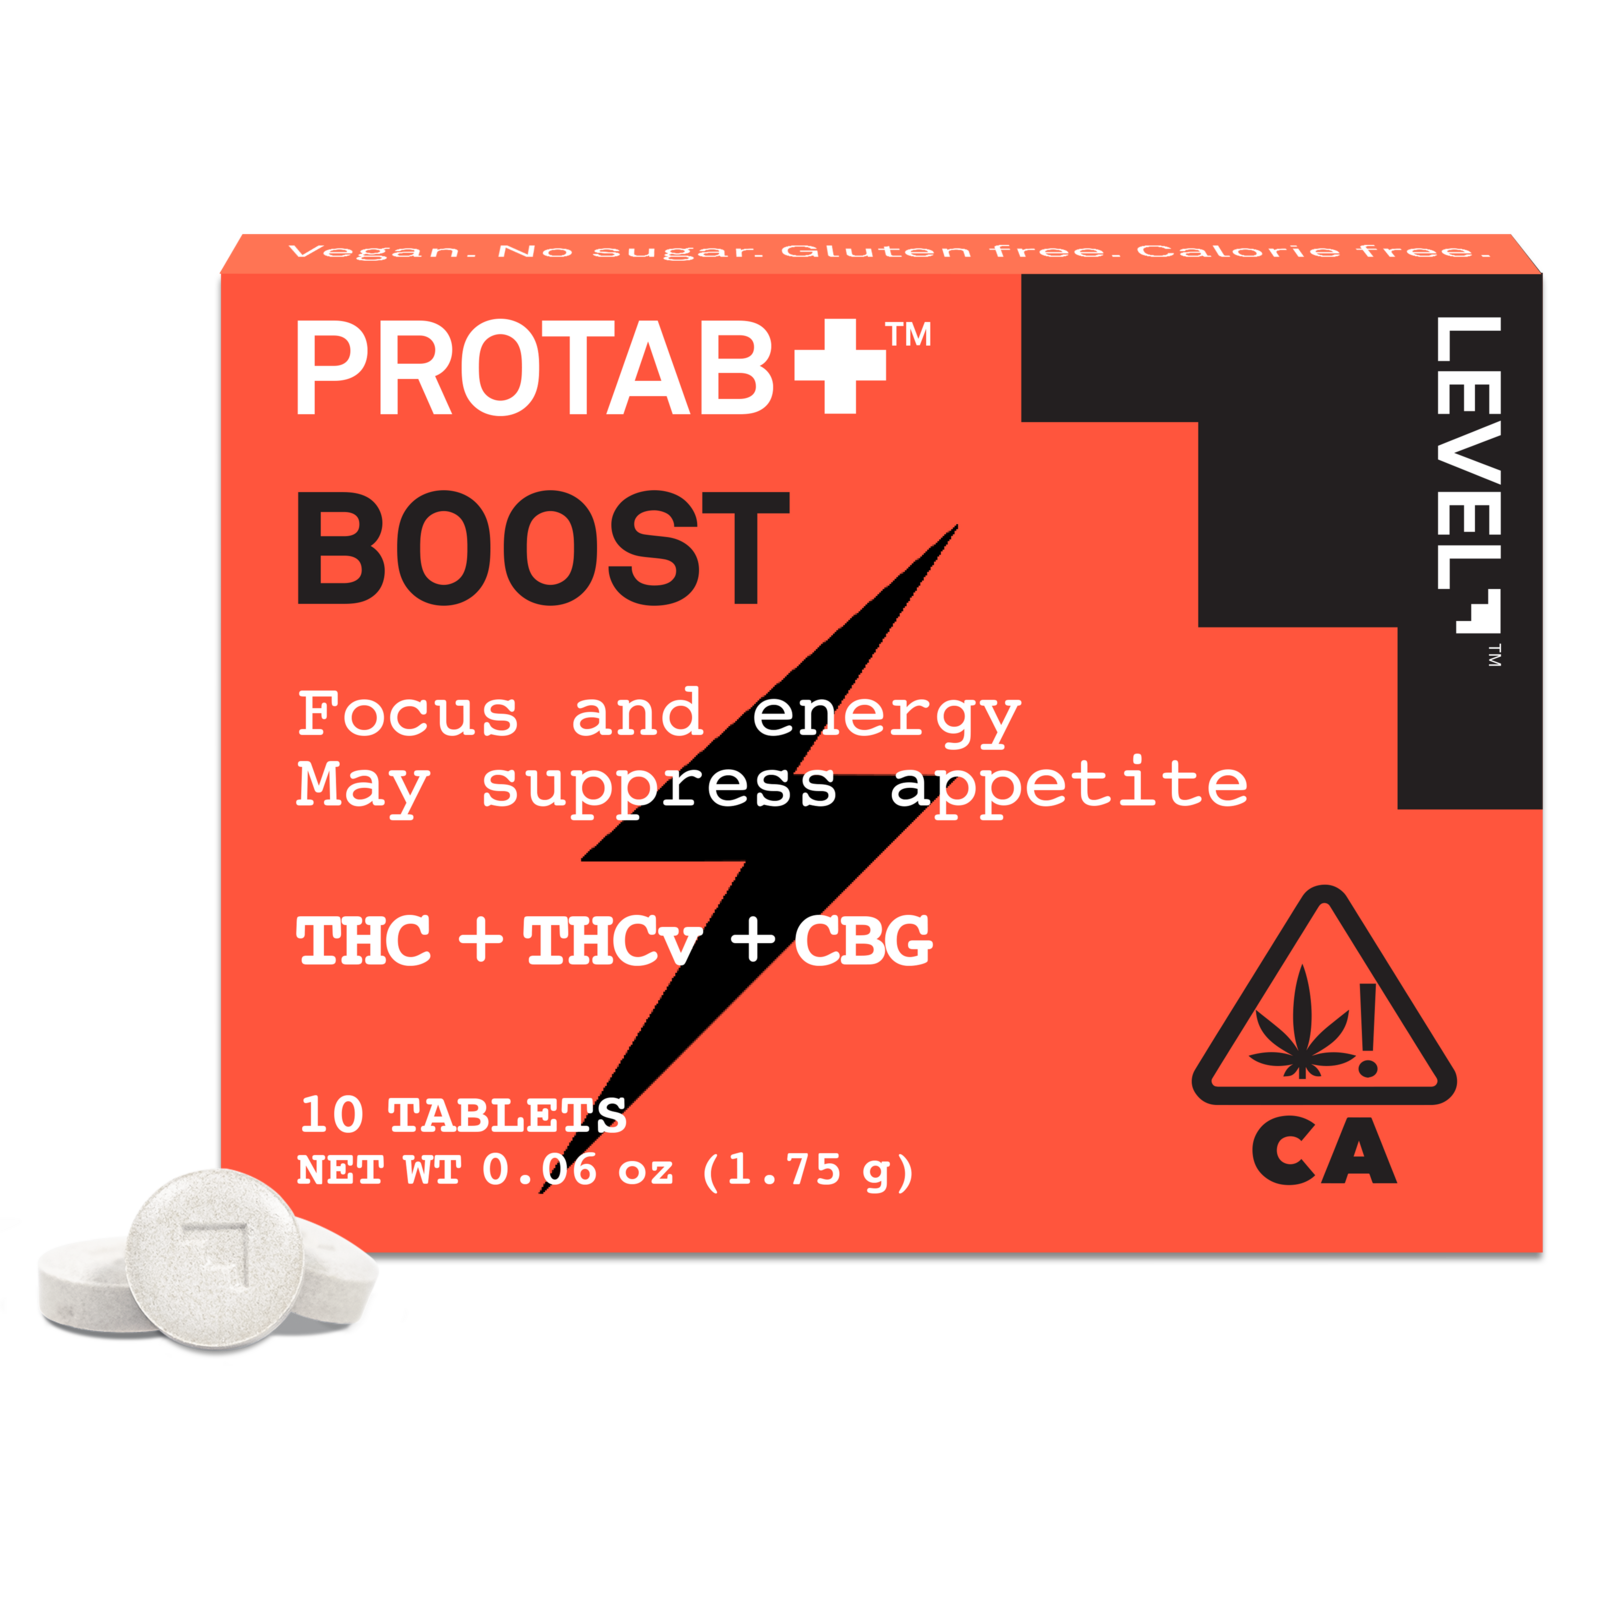 A photograph of Level Protab Boost